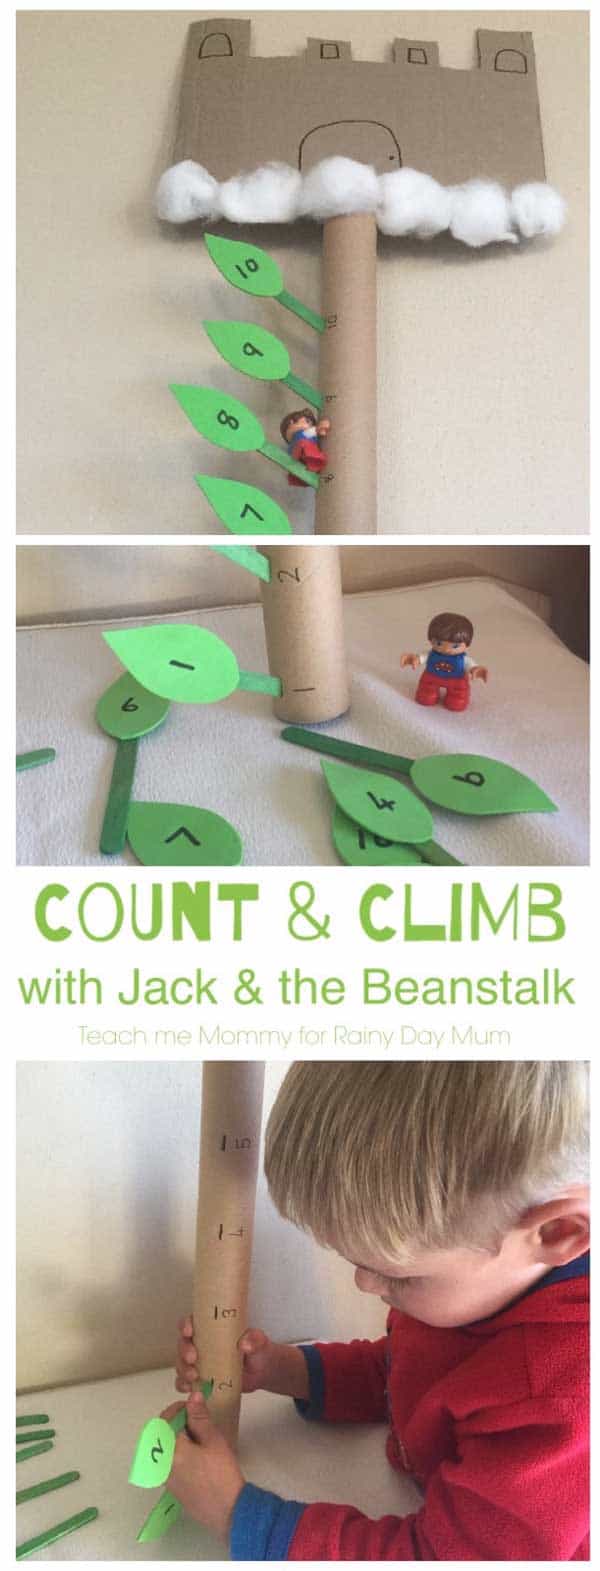 Count and climb Jack's beanstalk with this fun early year maths activity for toddlers and preschoolers for the classic Fairy Tale Jack and the Beanstalk